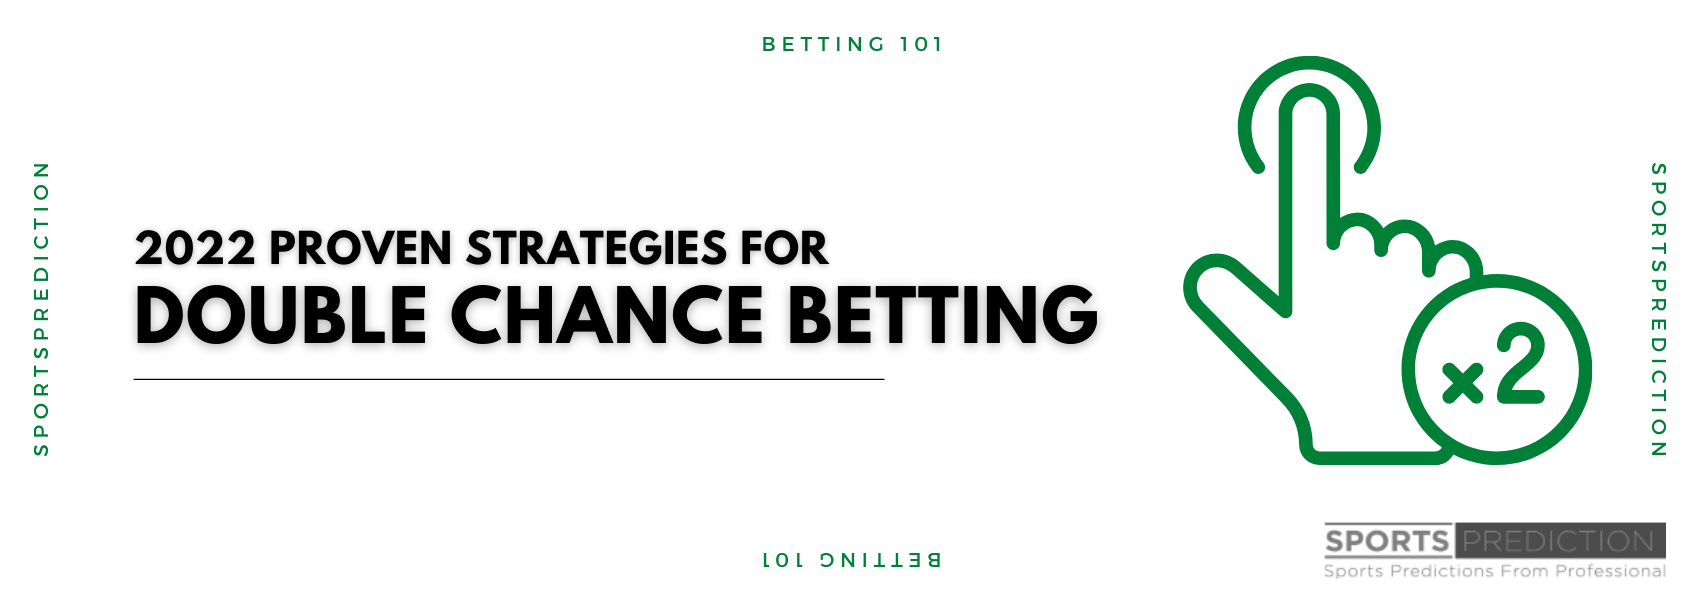 2022 Proven Strategies For Double Chance Betting